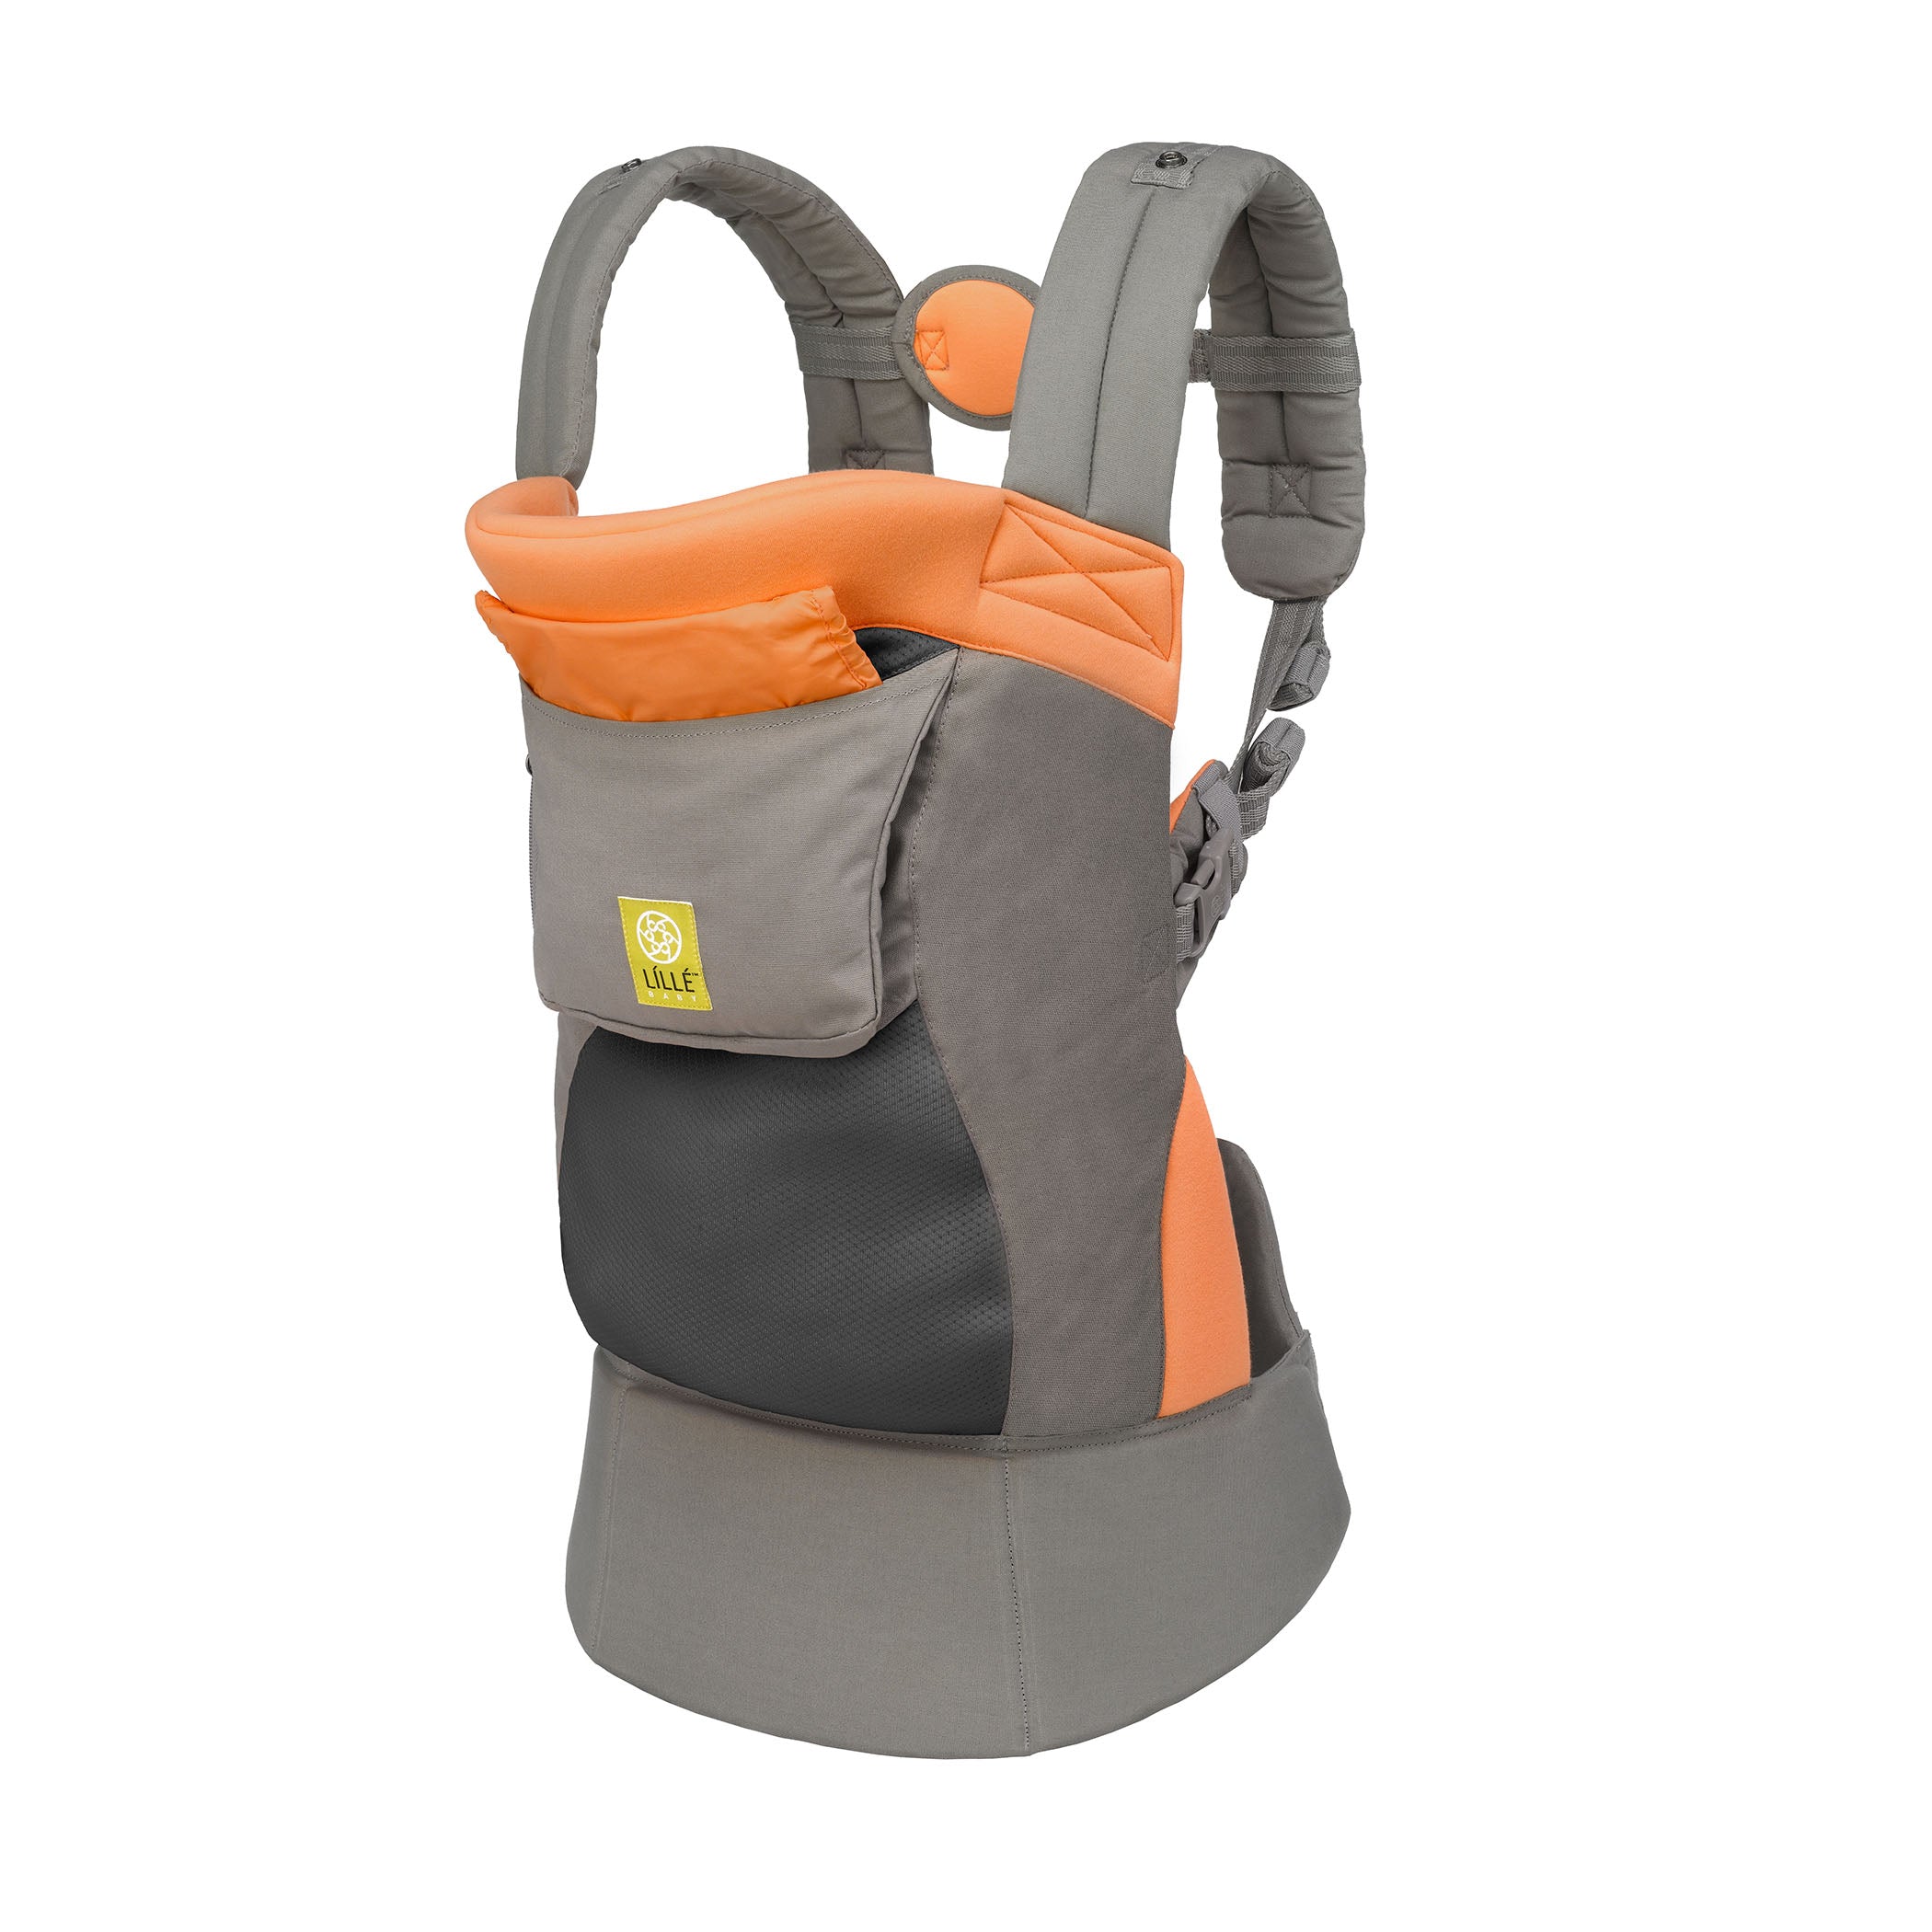 Toddler Carrier Carryon Airflow In Sunstone Dlx